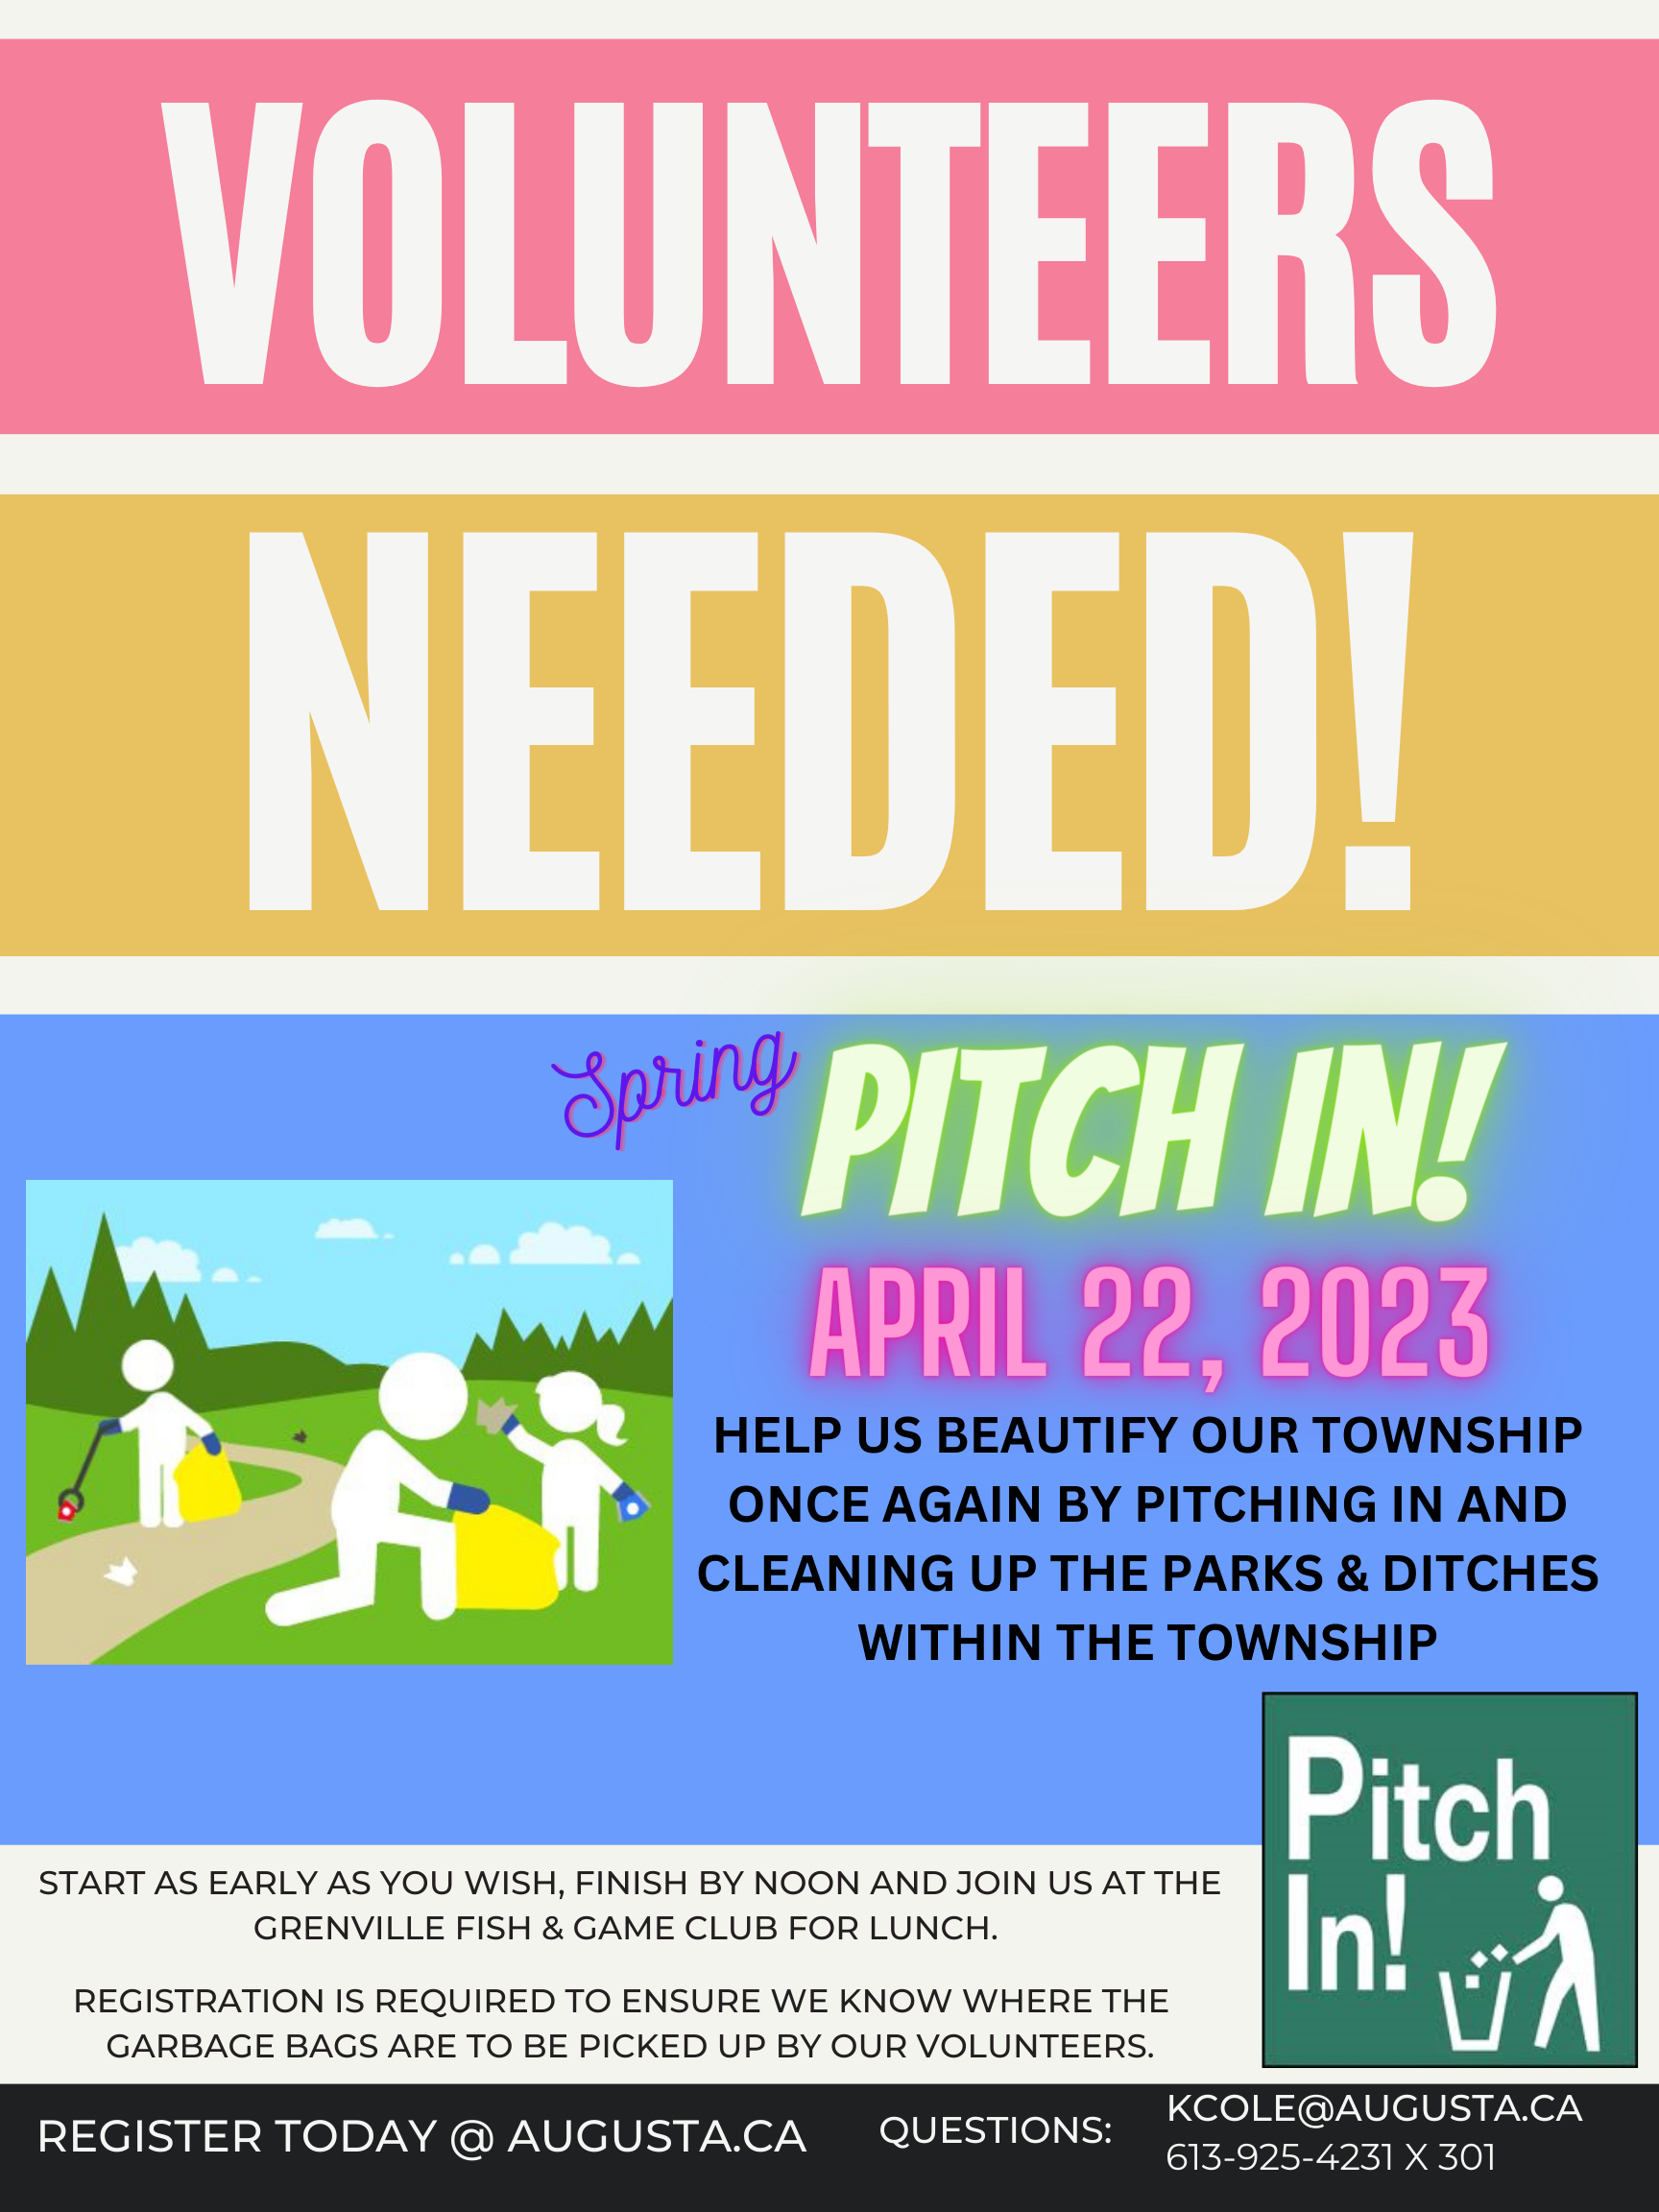 flyer stating that pitch in day is April 22, 2023